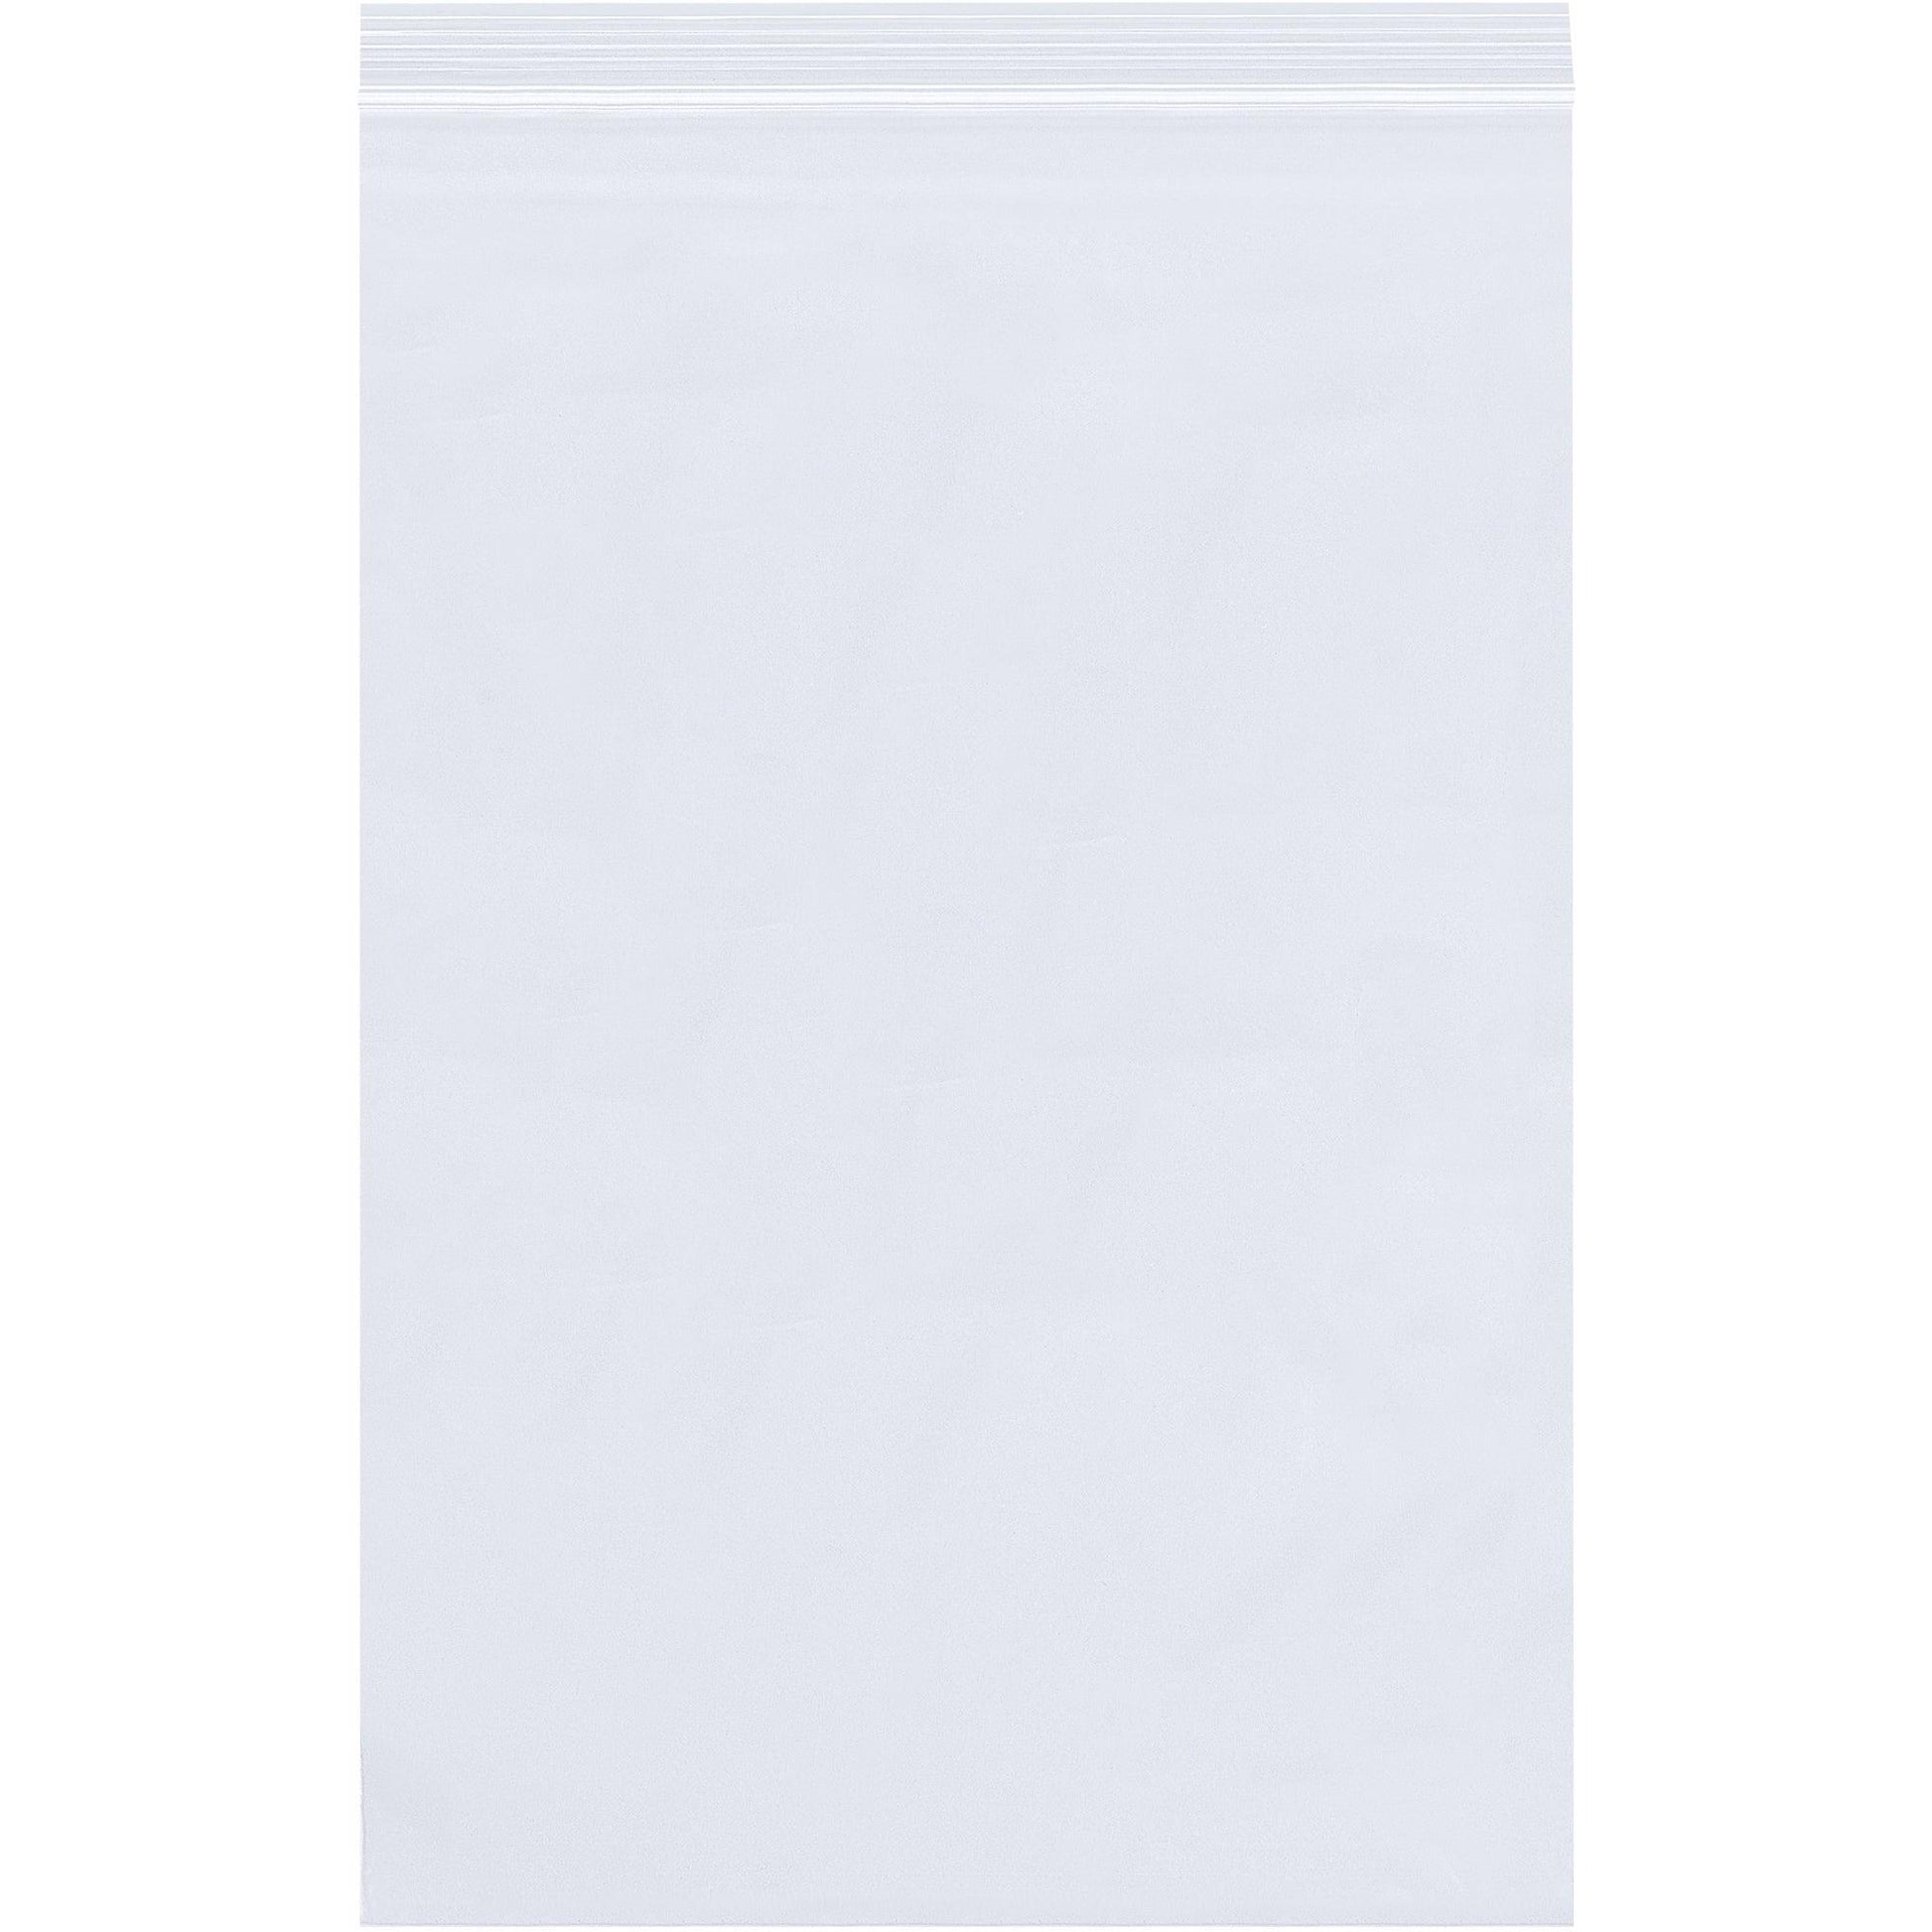 4 x 6" - 2 Mil Reclosable Poly Bags - PB3565